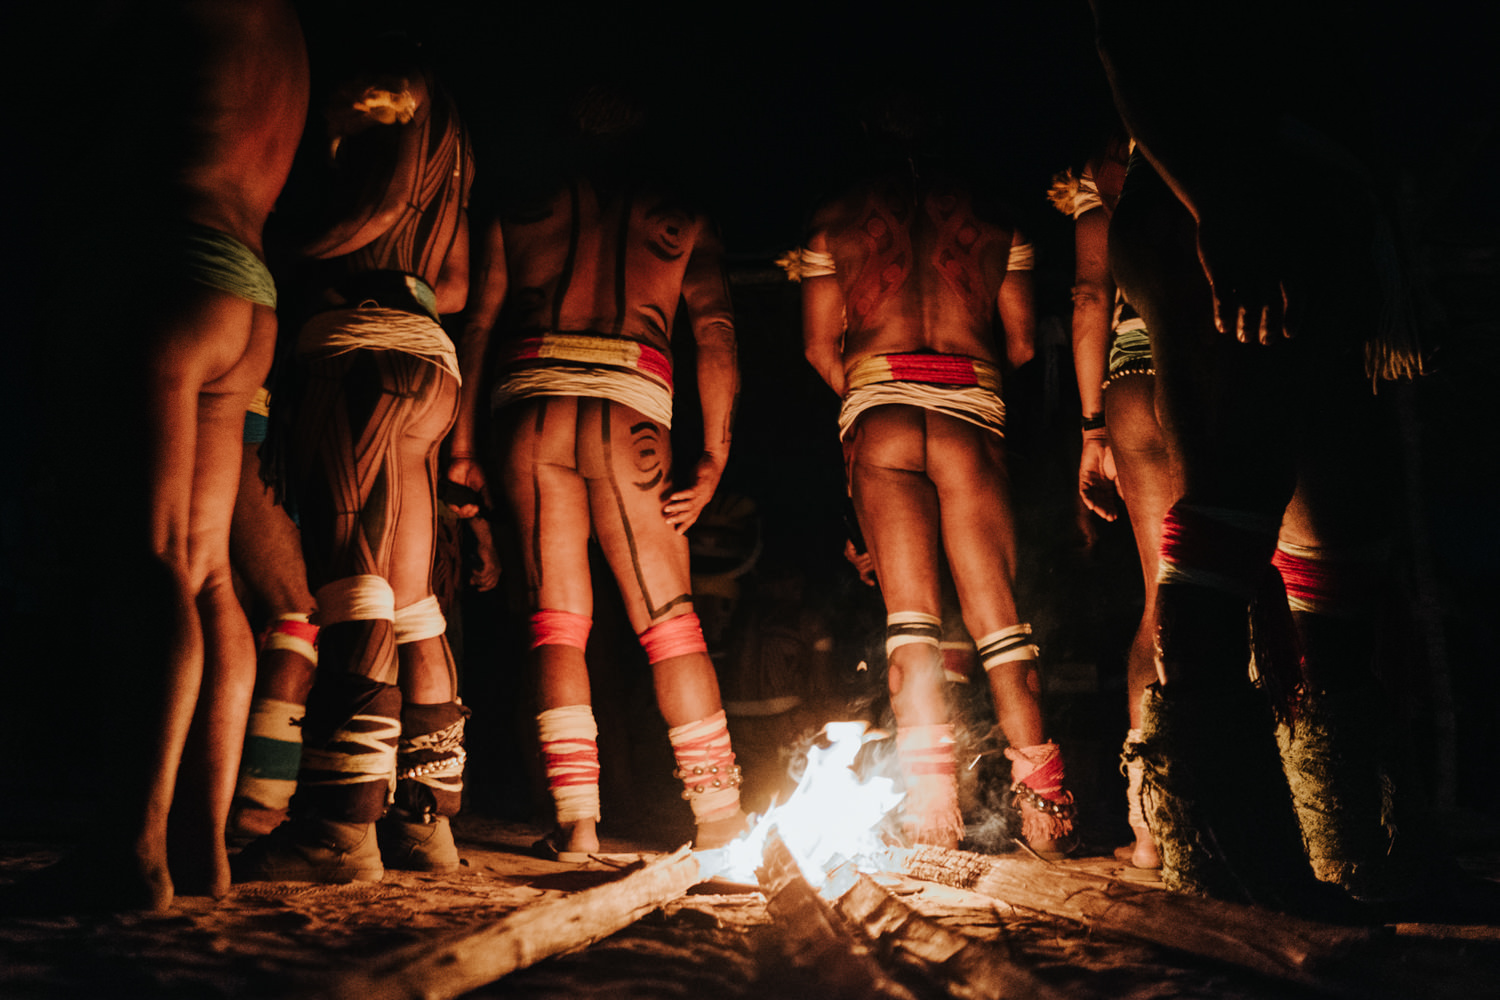 During ritual nights, men gather in the central square around the fire to warm themselves, smoke and discuss matters of importance to the tribe.